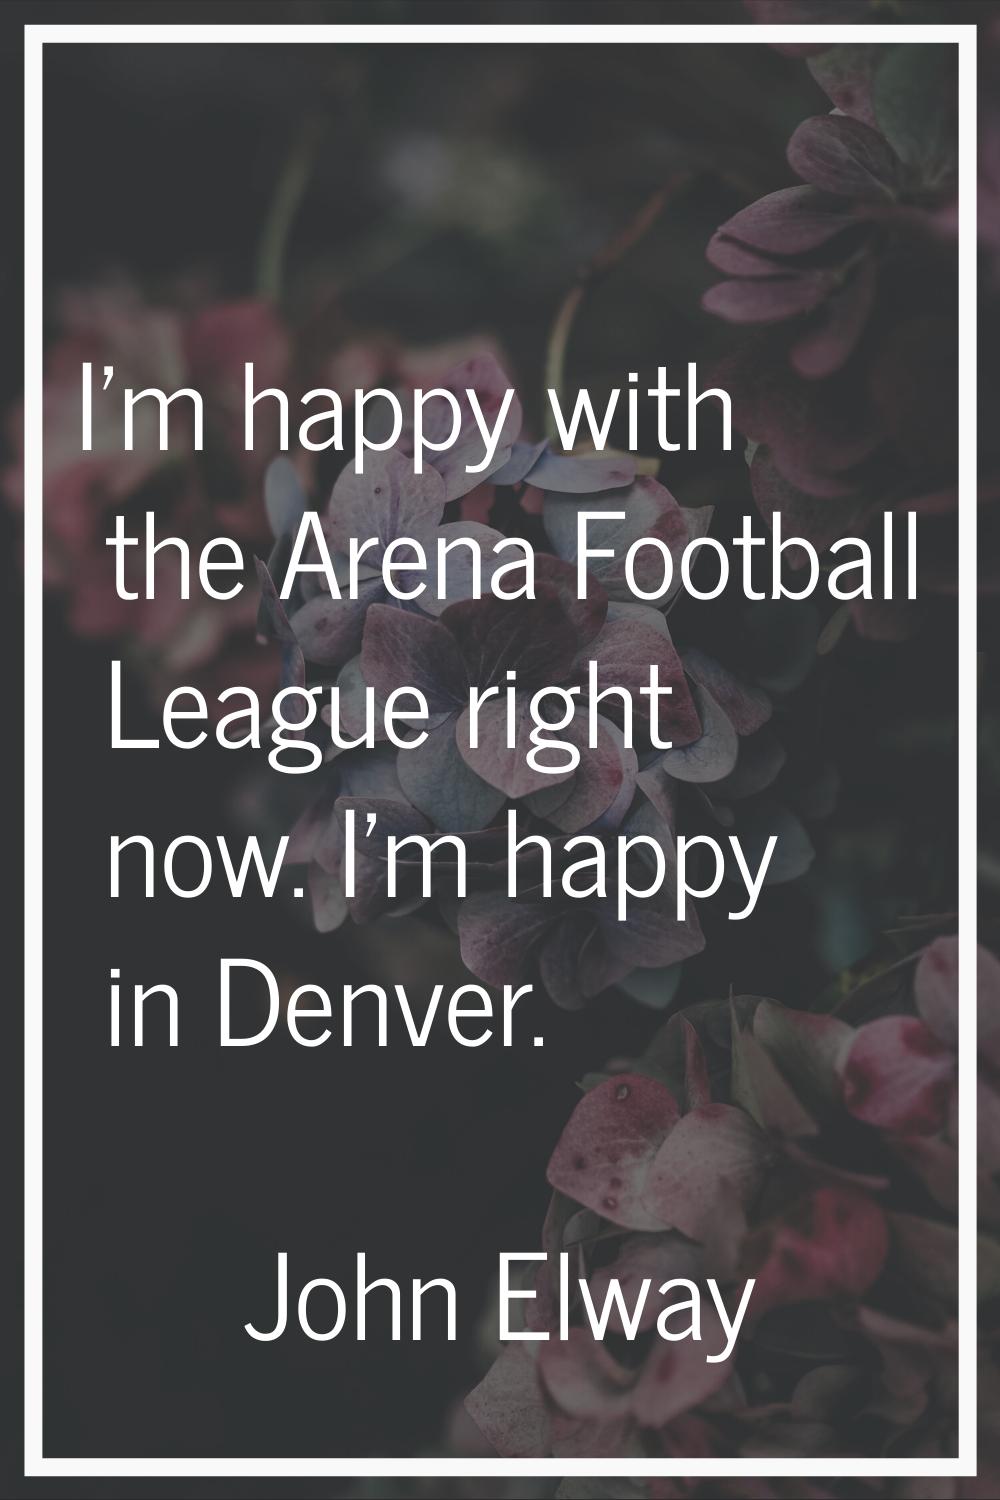 I'm happy with the Arena Football League right now. I'm happy in Denver.